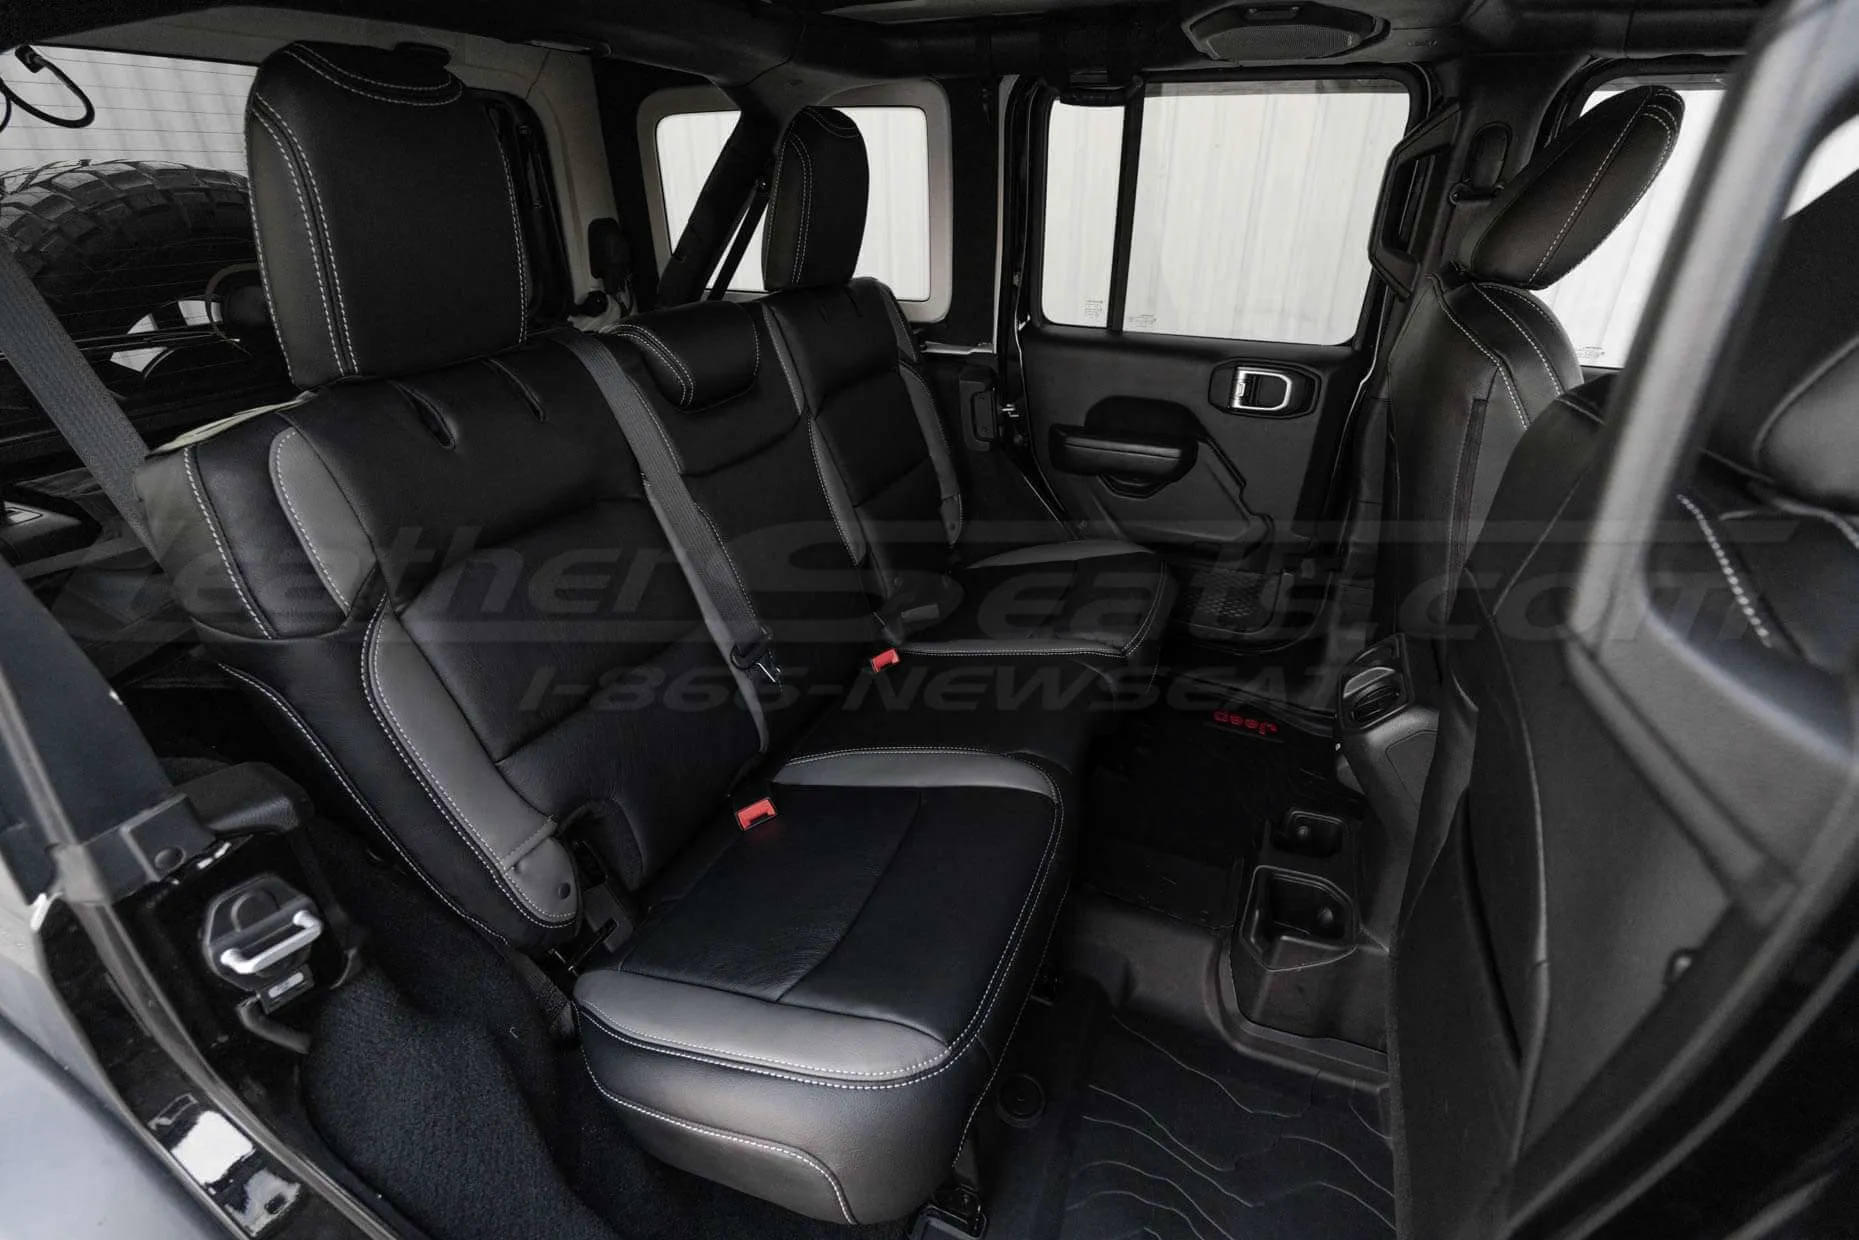 Jeep Wrangler JL Leather Seats - Black with Grey Wings - Rear seats from passenger side